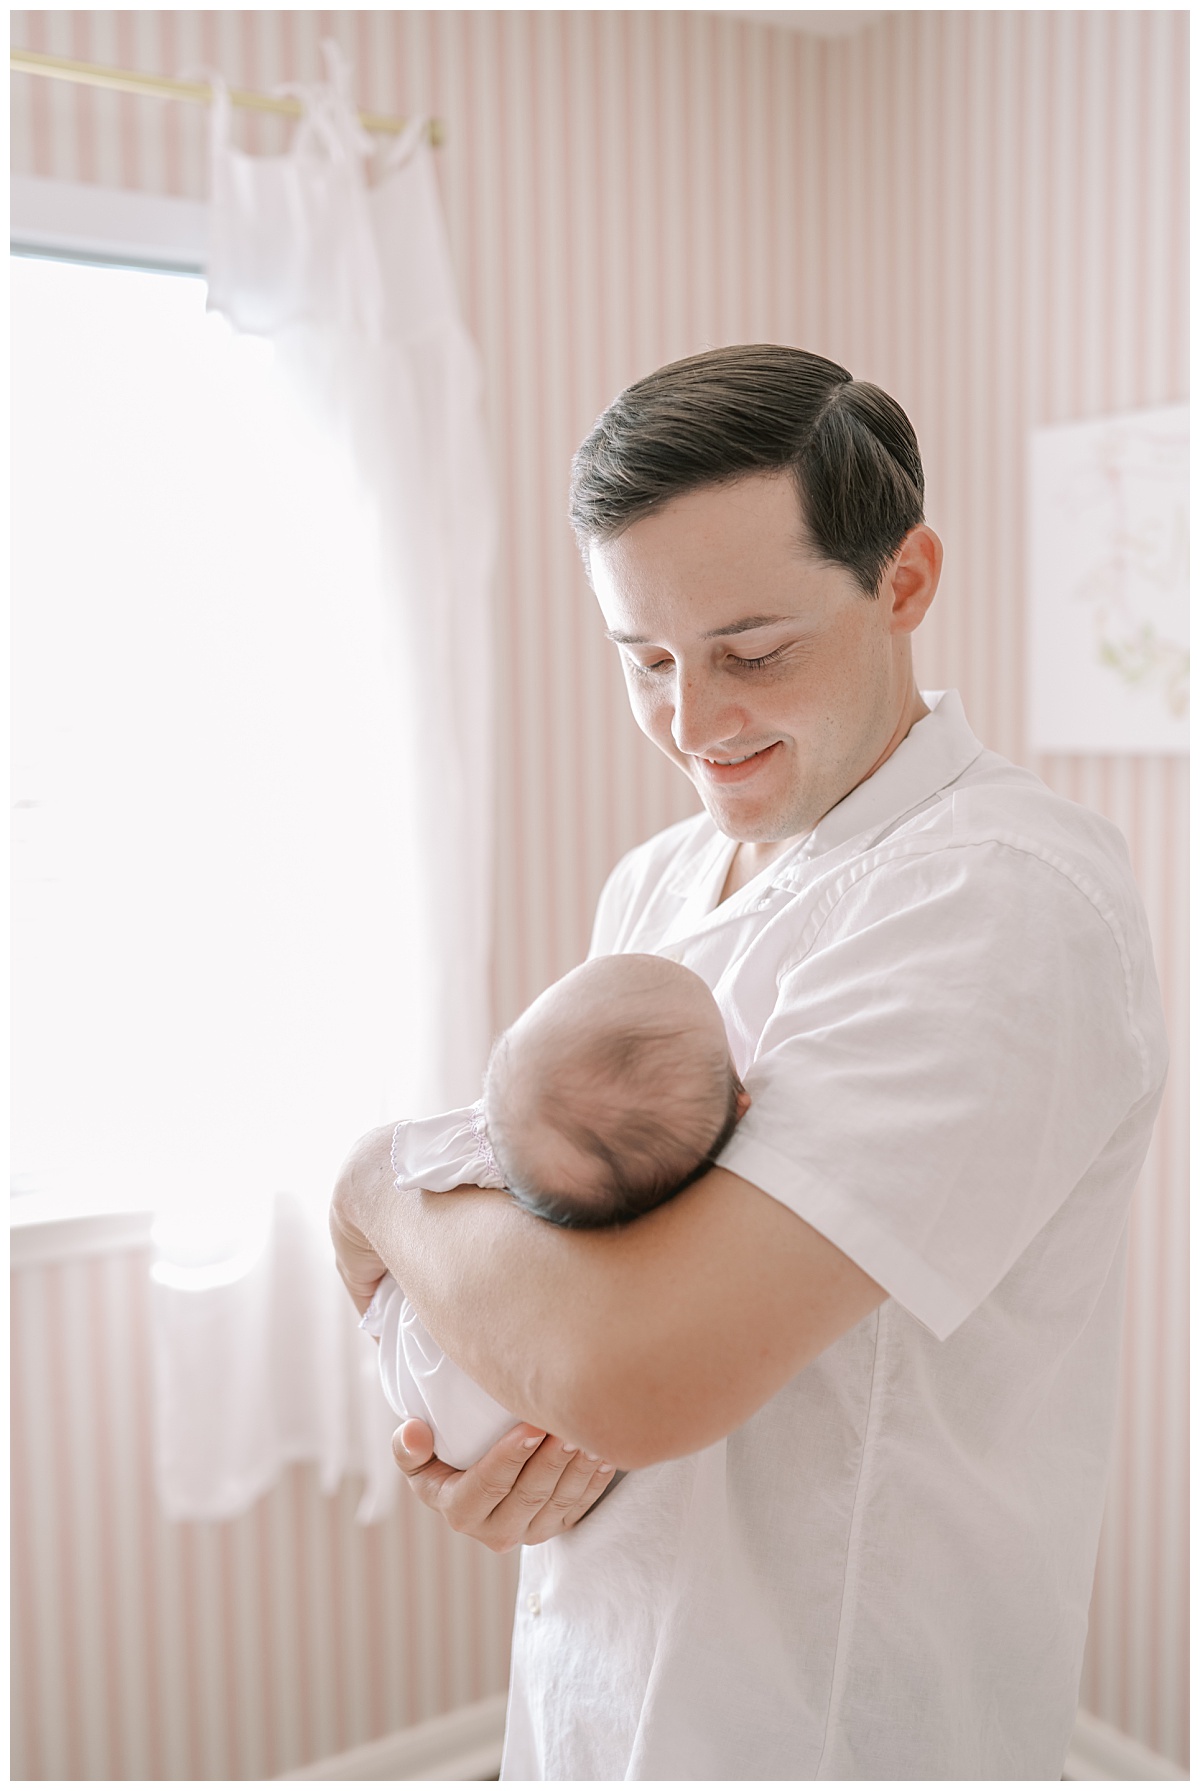 Dad holding baby girl in a pink nursery for their in-home newborn portraits in San Antonio, TX taken by Teressa Jane Photography, a San Antonio Newborn Photographer.